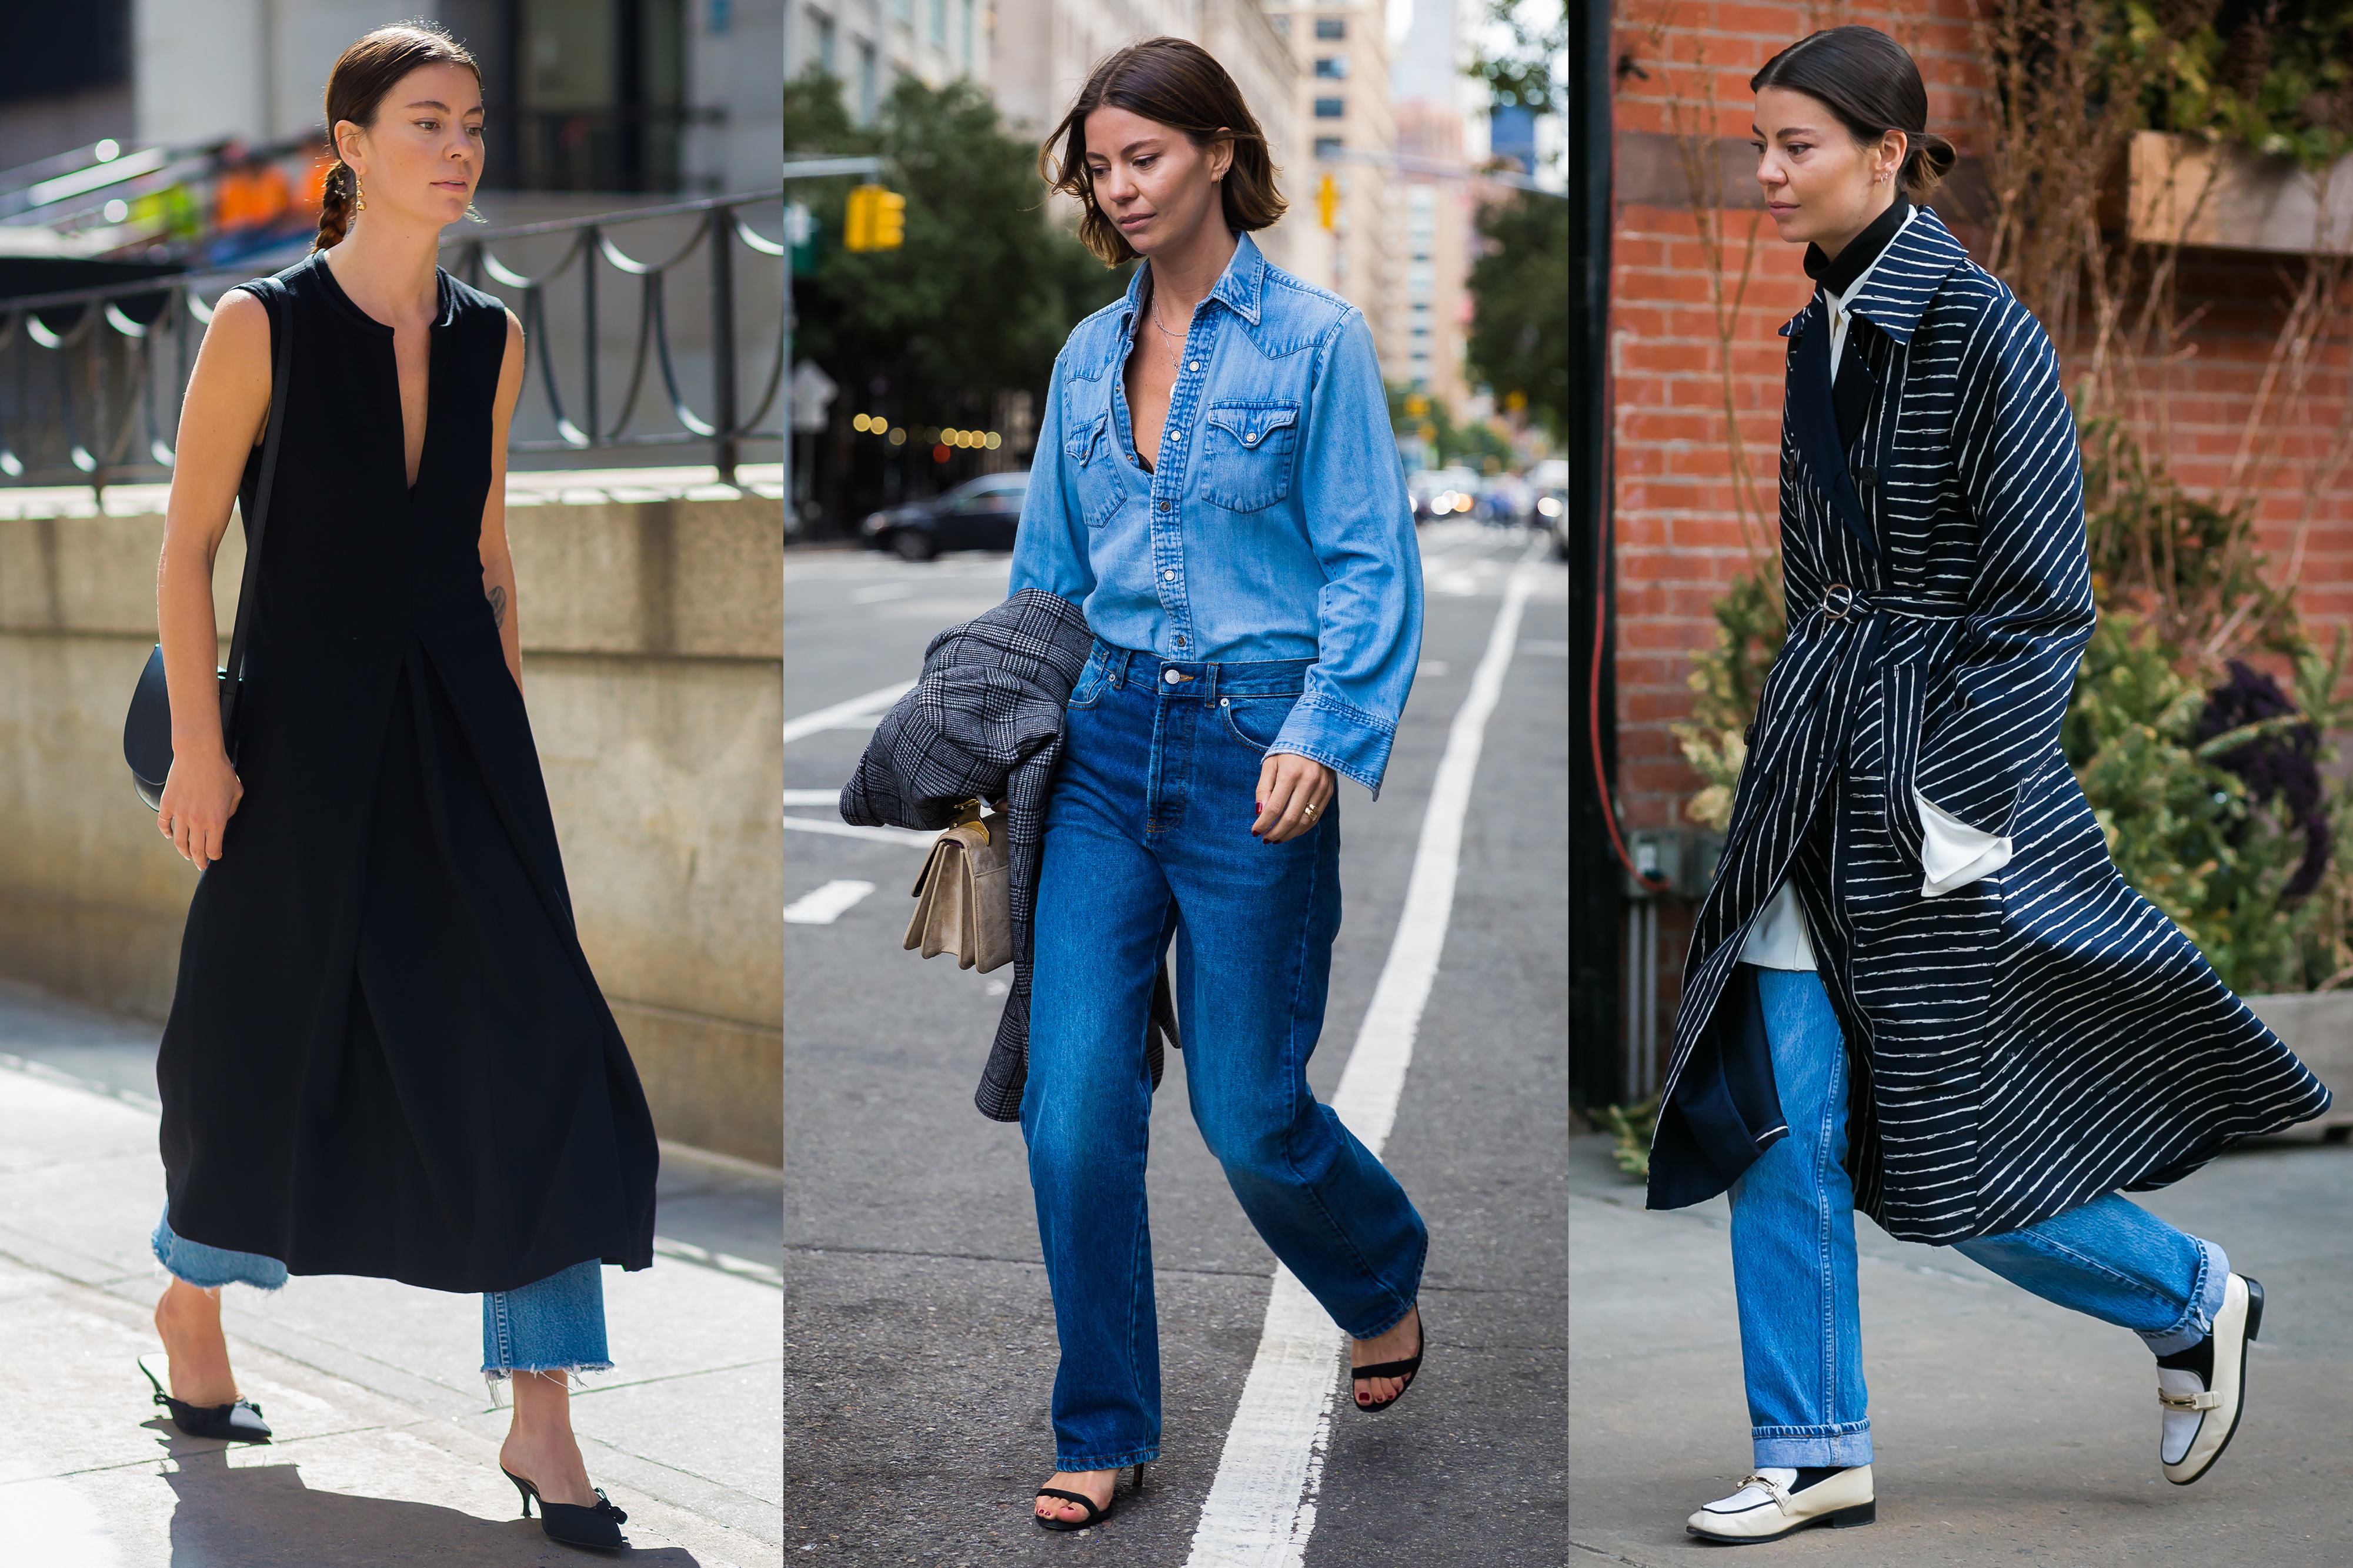 How To Wear Wide Leg Jeans According To A Denim Expert | PORTER